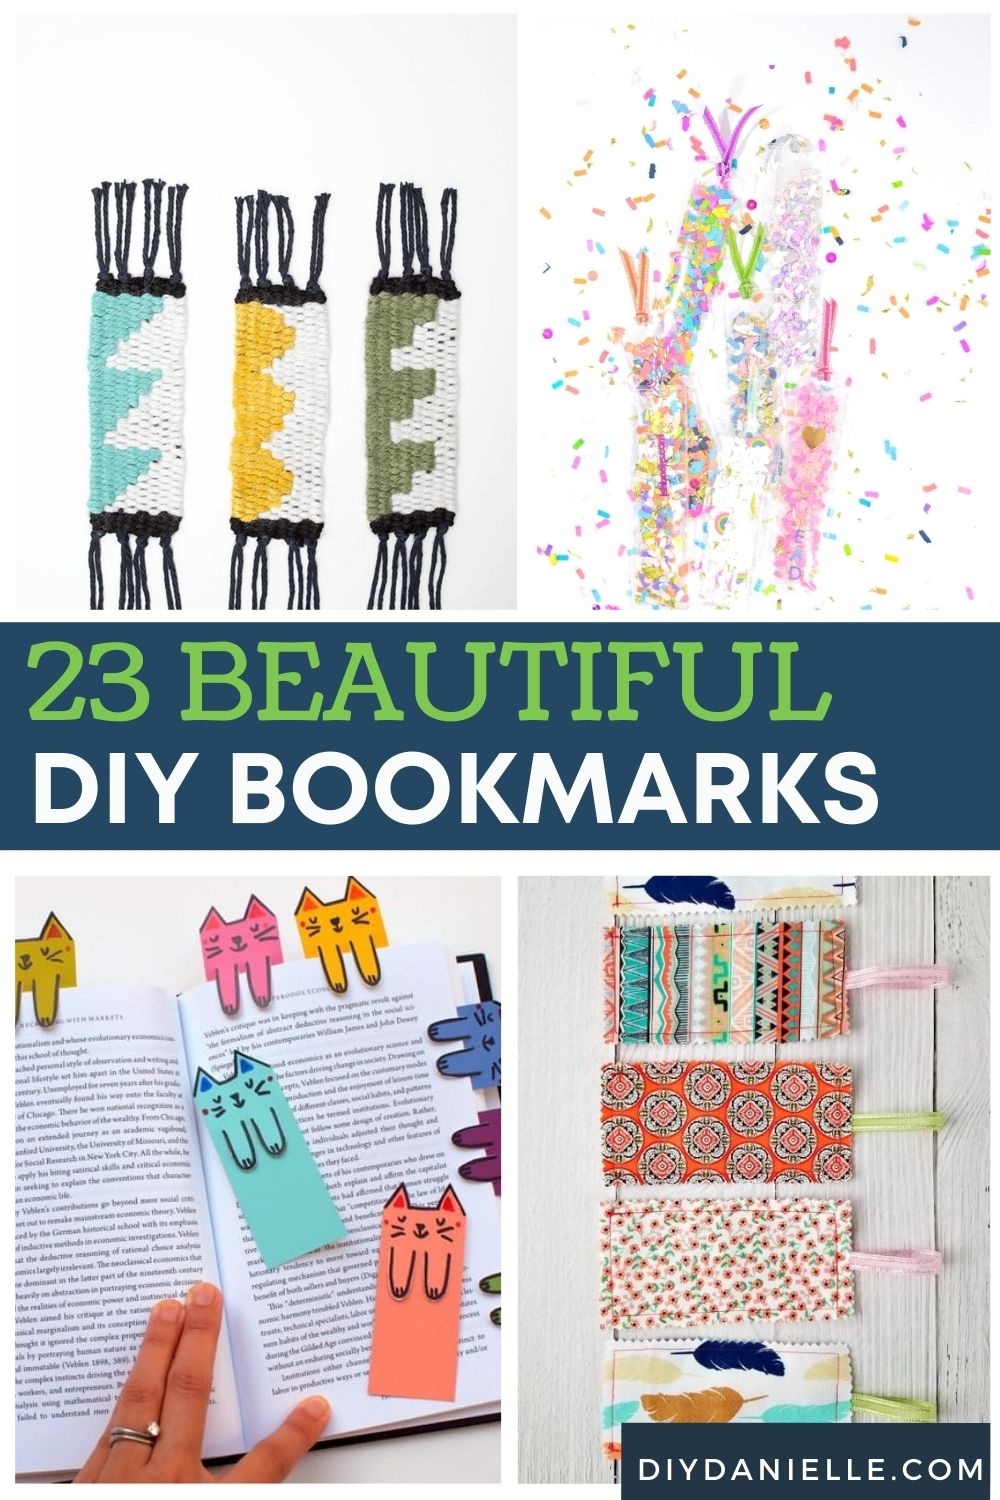 https://diydanielle.com/wp-content/uploads/2021/09/DIY-Bookmarks-Beautiful-Bookmarks-to-Make-for-Gifts.jpg